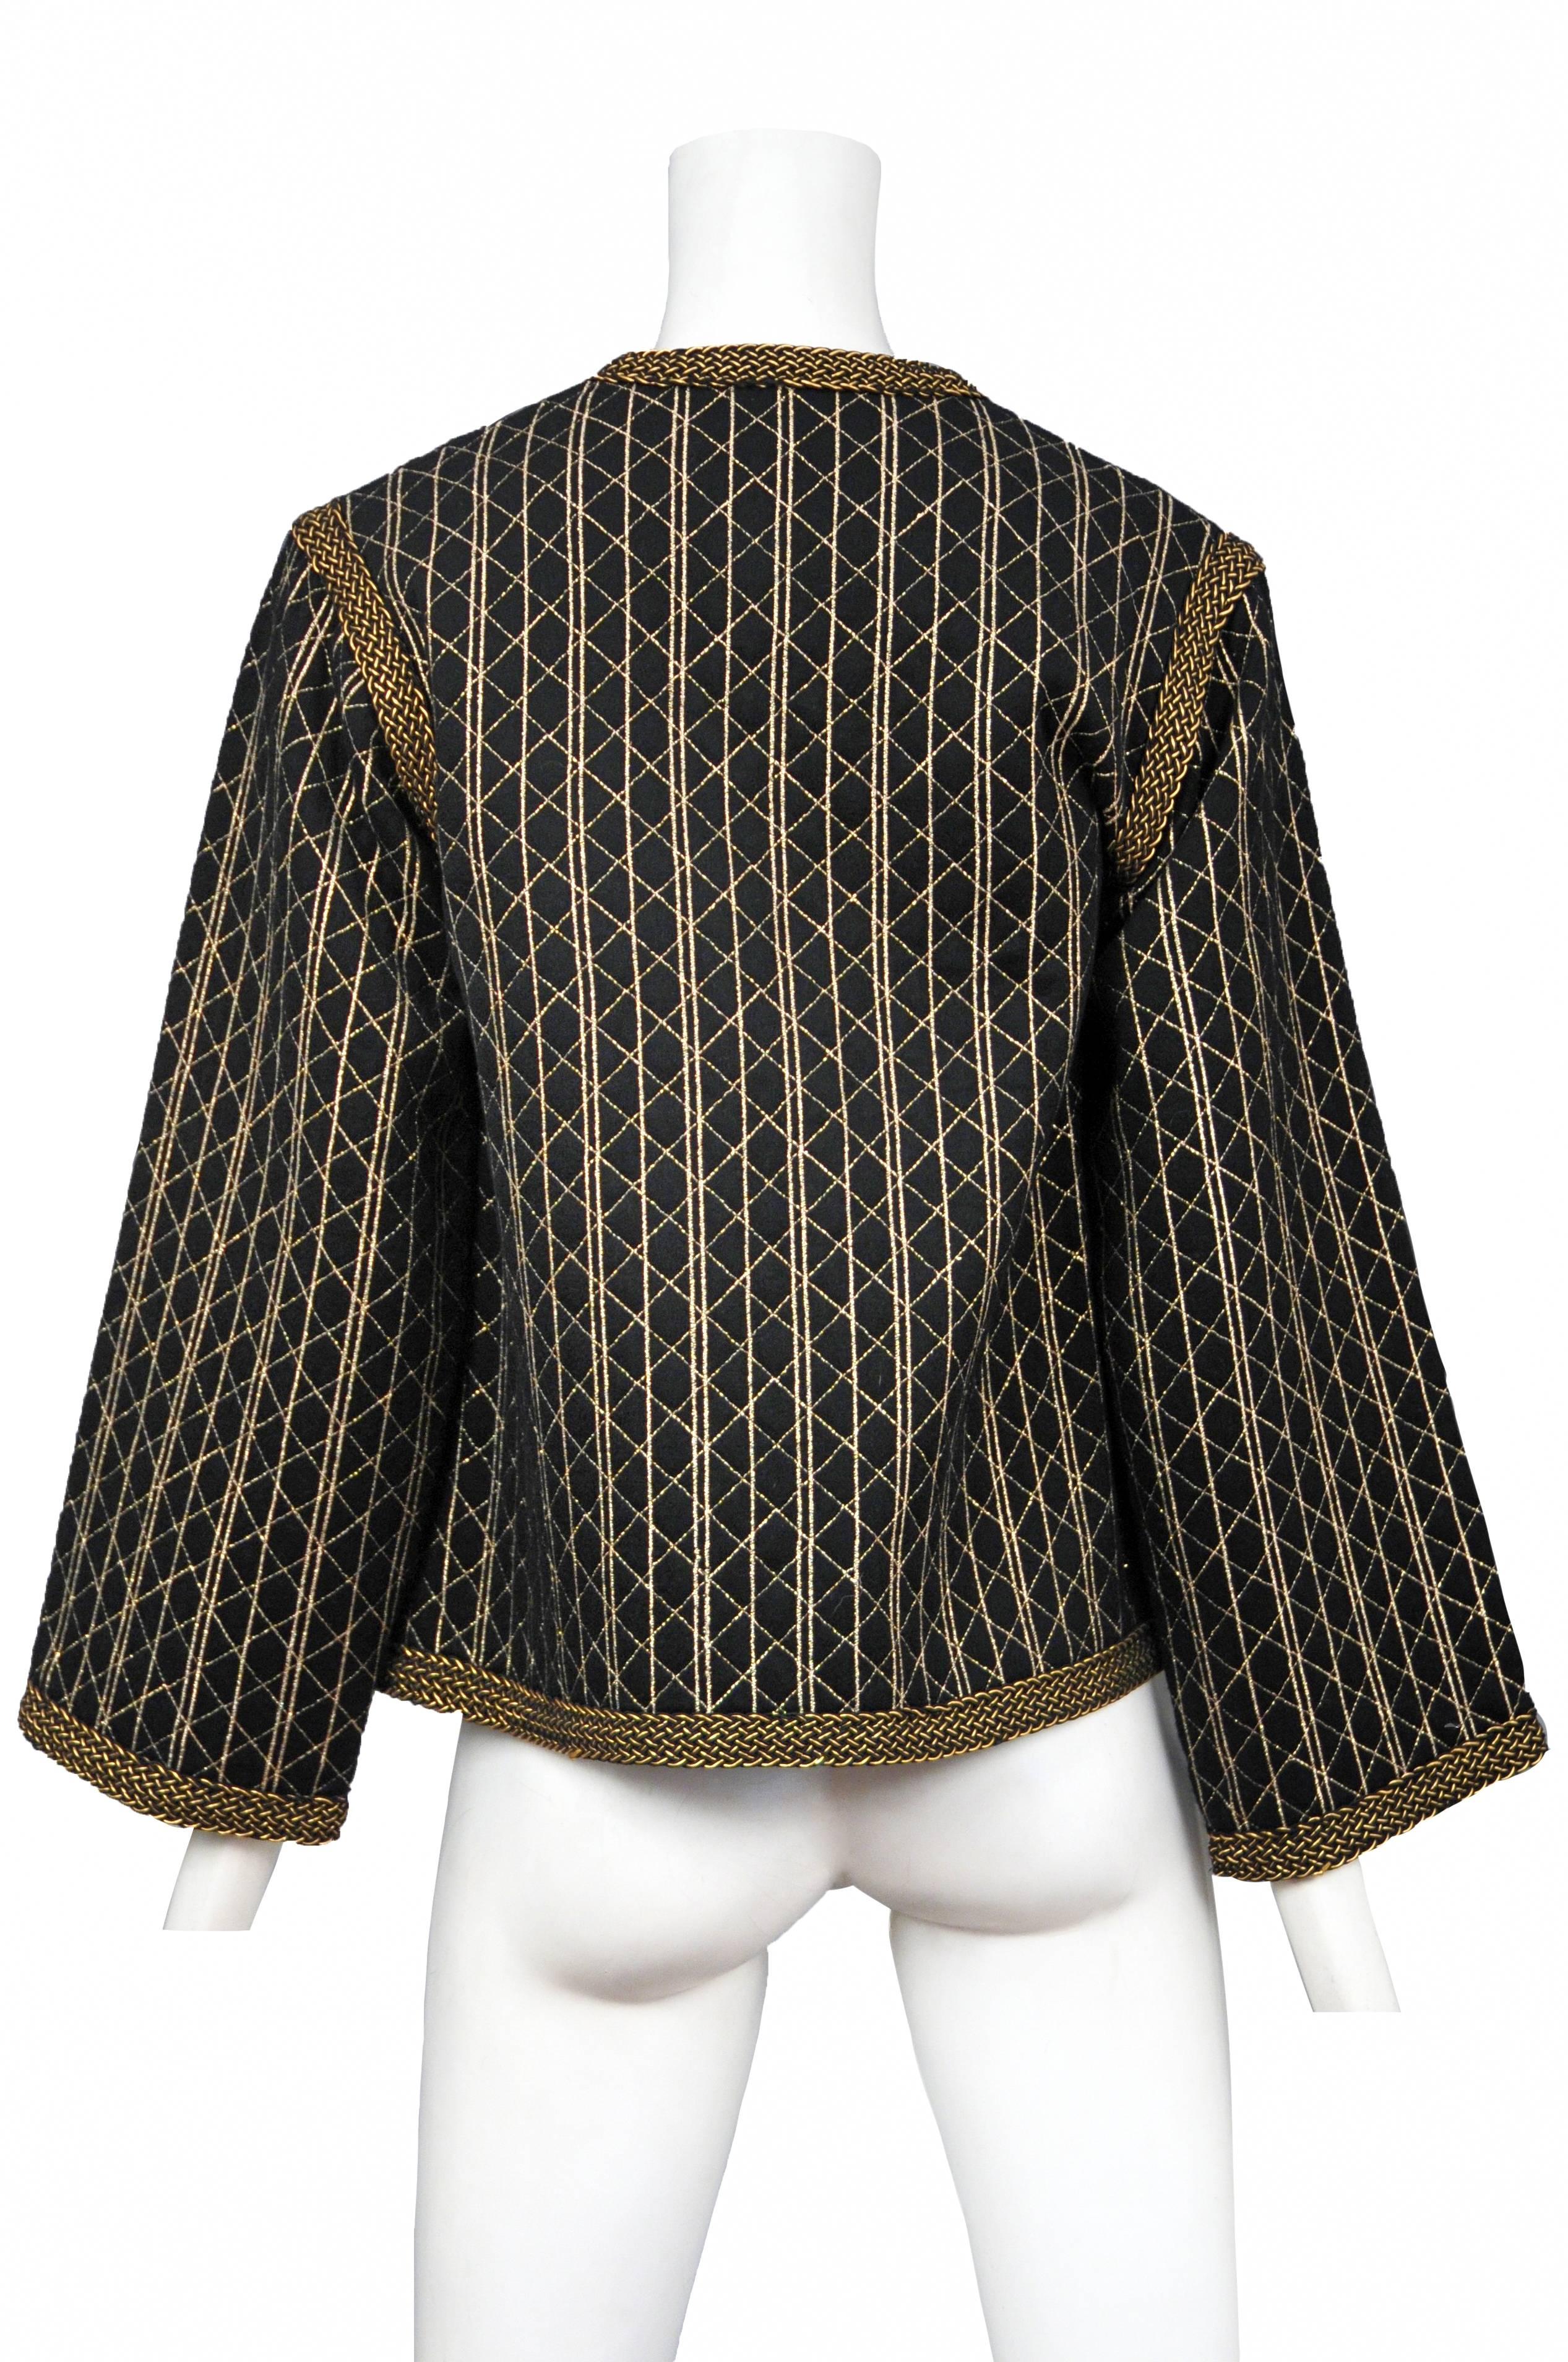 Vintage Yves Saint Laurent black quilted button front jacket featuring gold quilted stitching throughout and gold braided trim along the edges and shoulder seams.